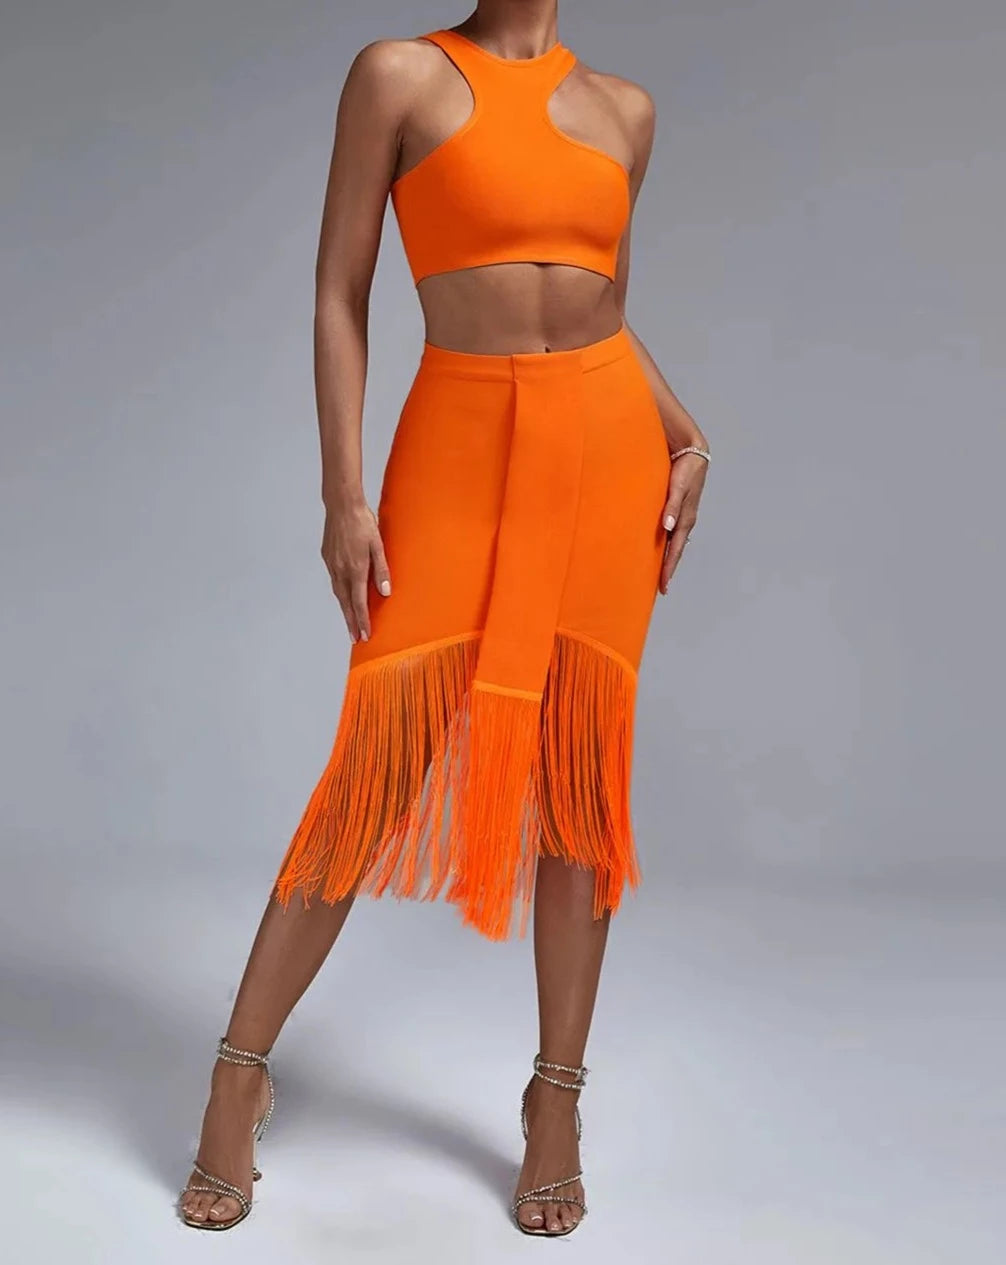 Women's orange crop tank and skirt outfit set